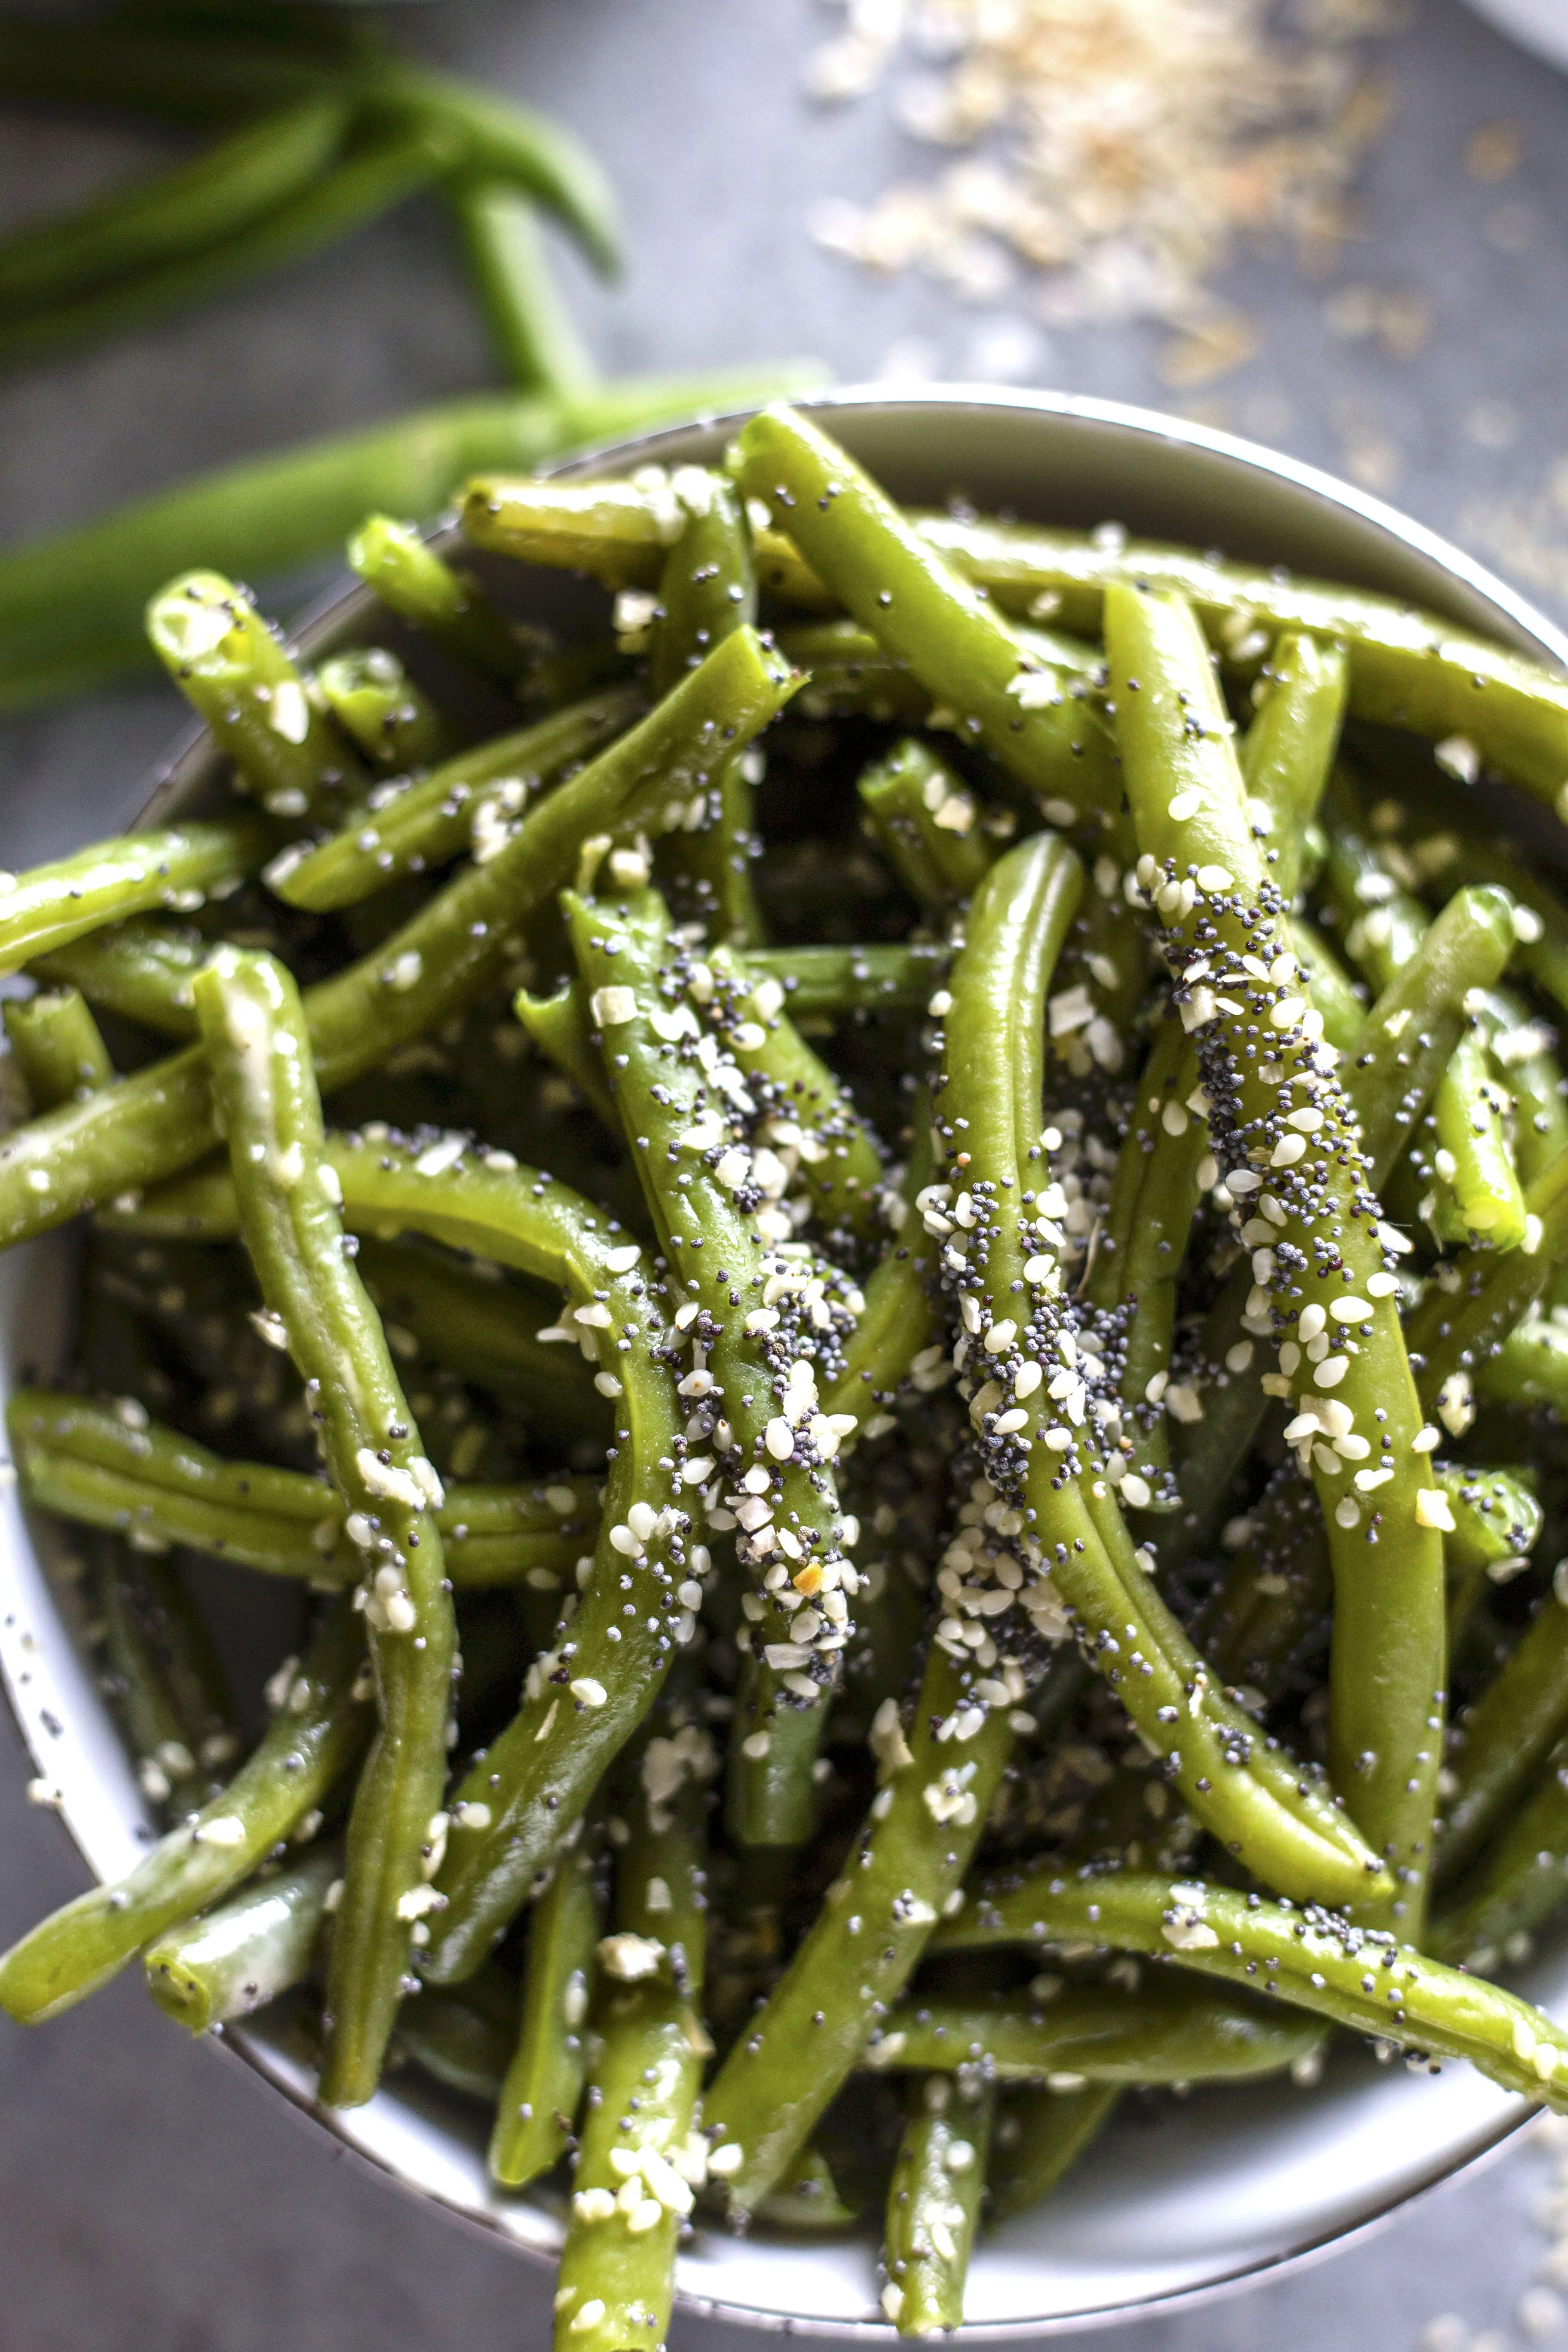 If you love everything bagels then you NEED these "everything" seasoned green beans in your life!